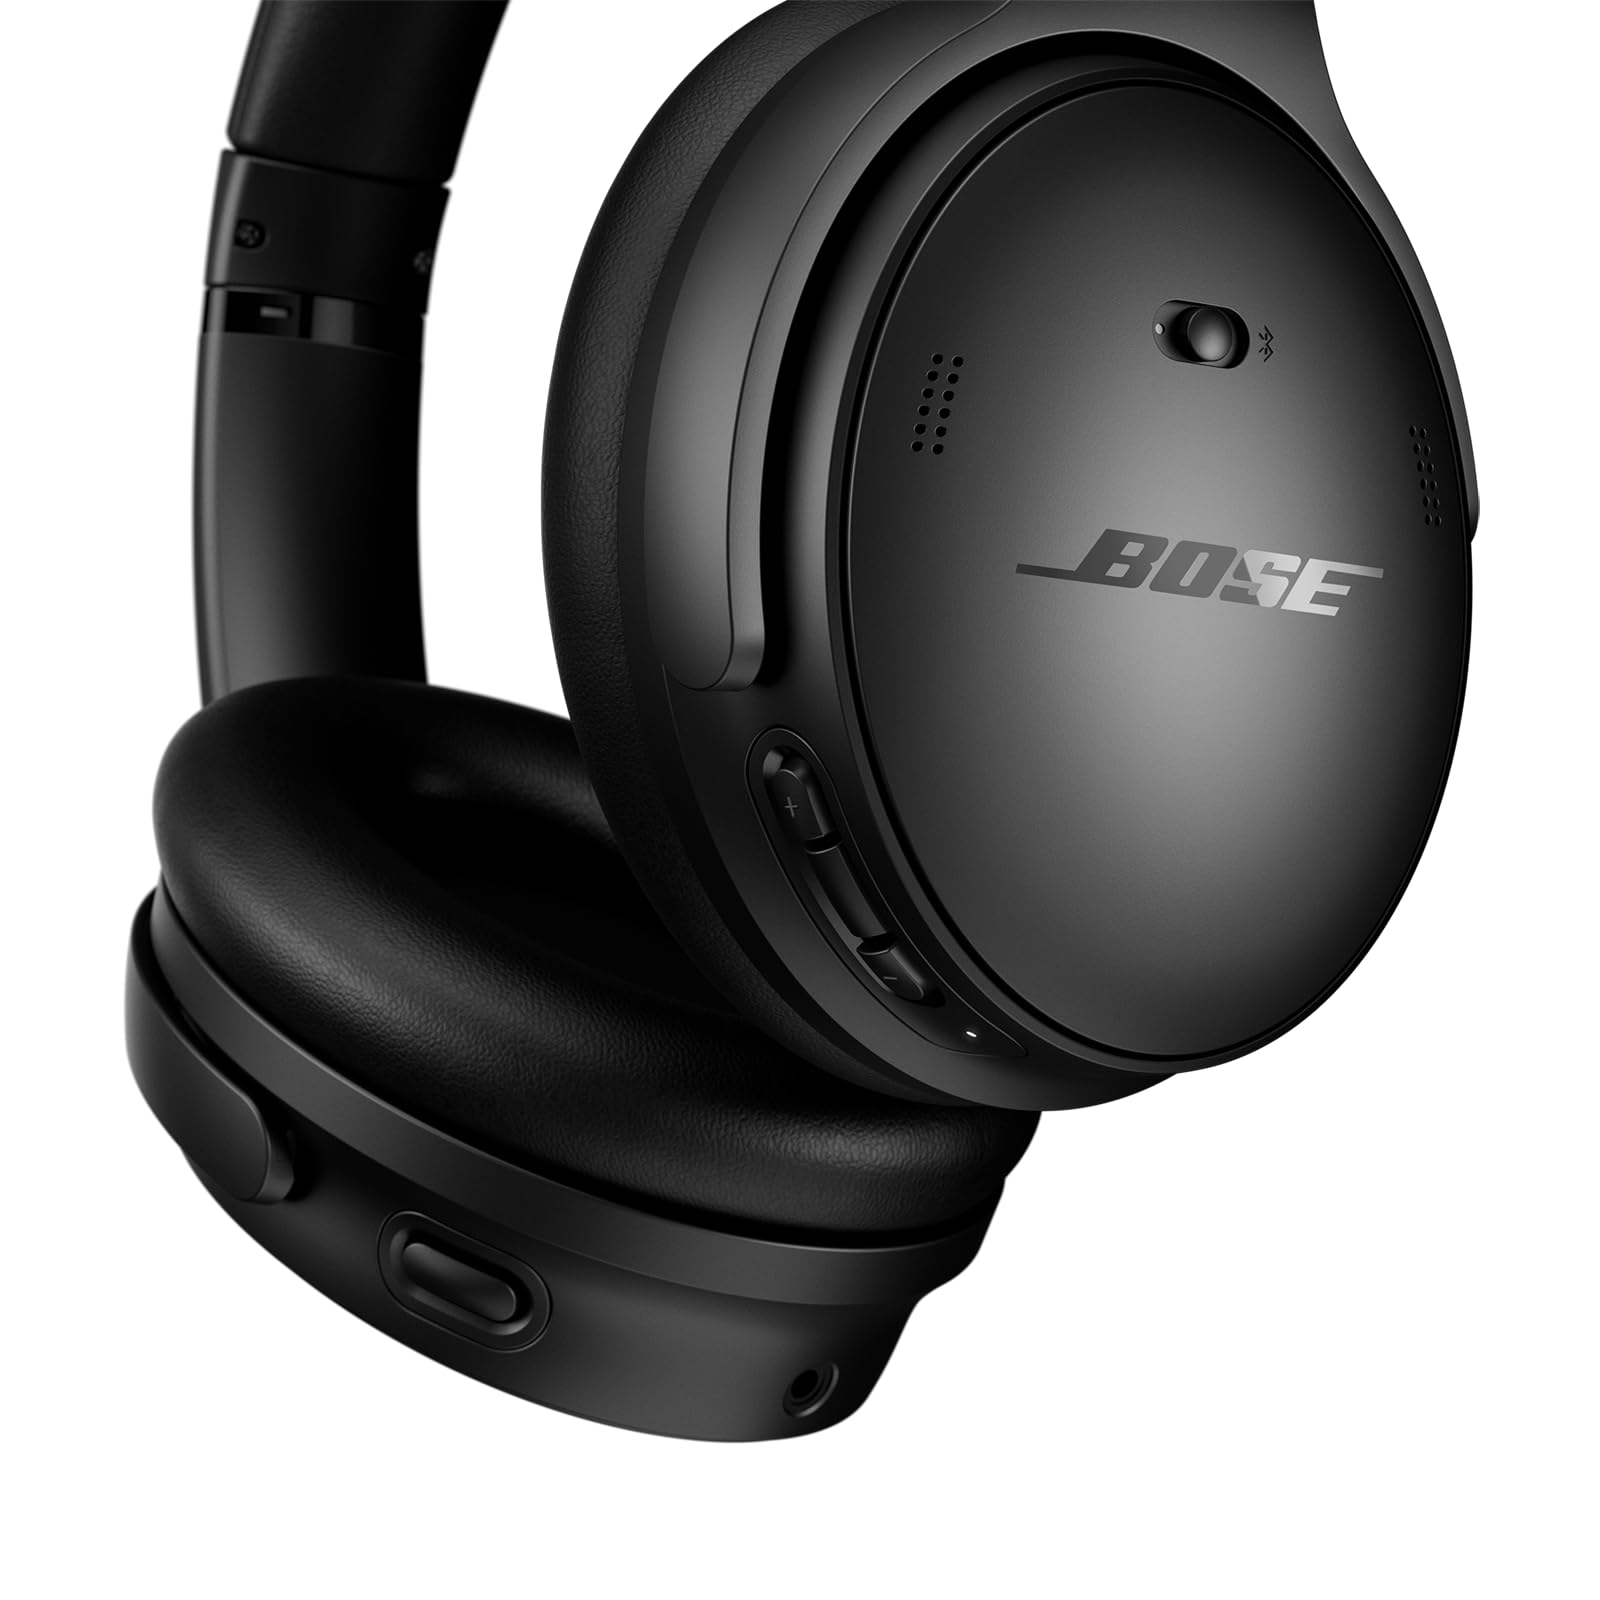 New Bose QuietComfort Wireless Noise Cancelling Headphones, Bluetooth Over Ear Headphones with Up To 24 Hours of Battery Life, Black